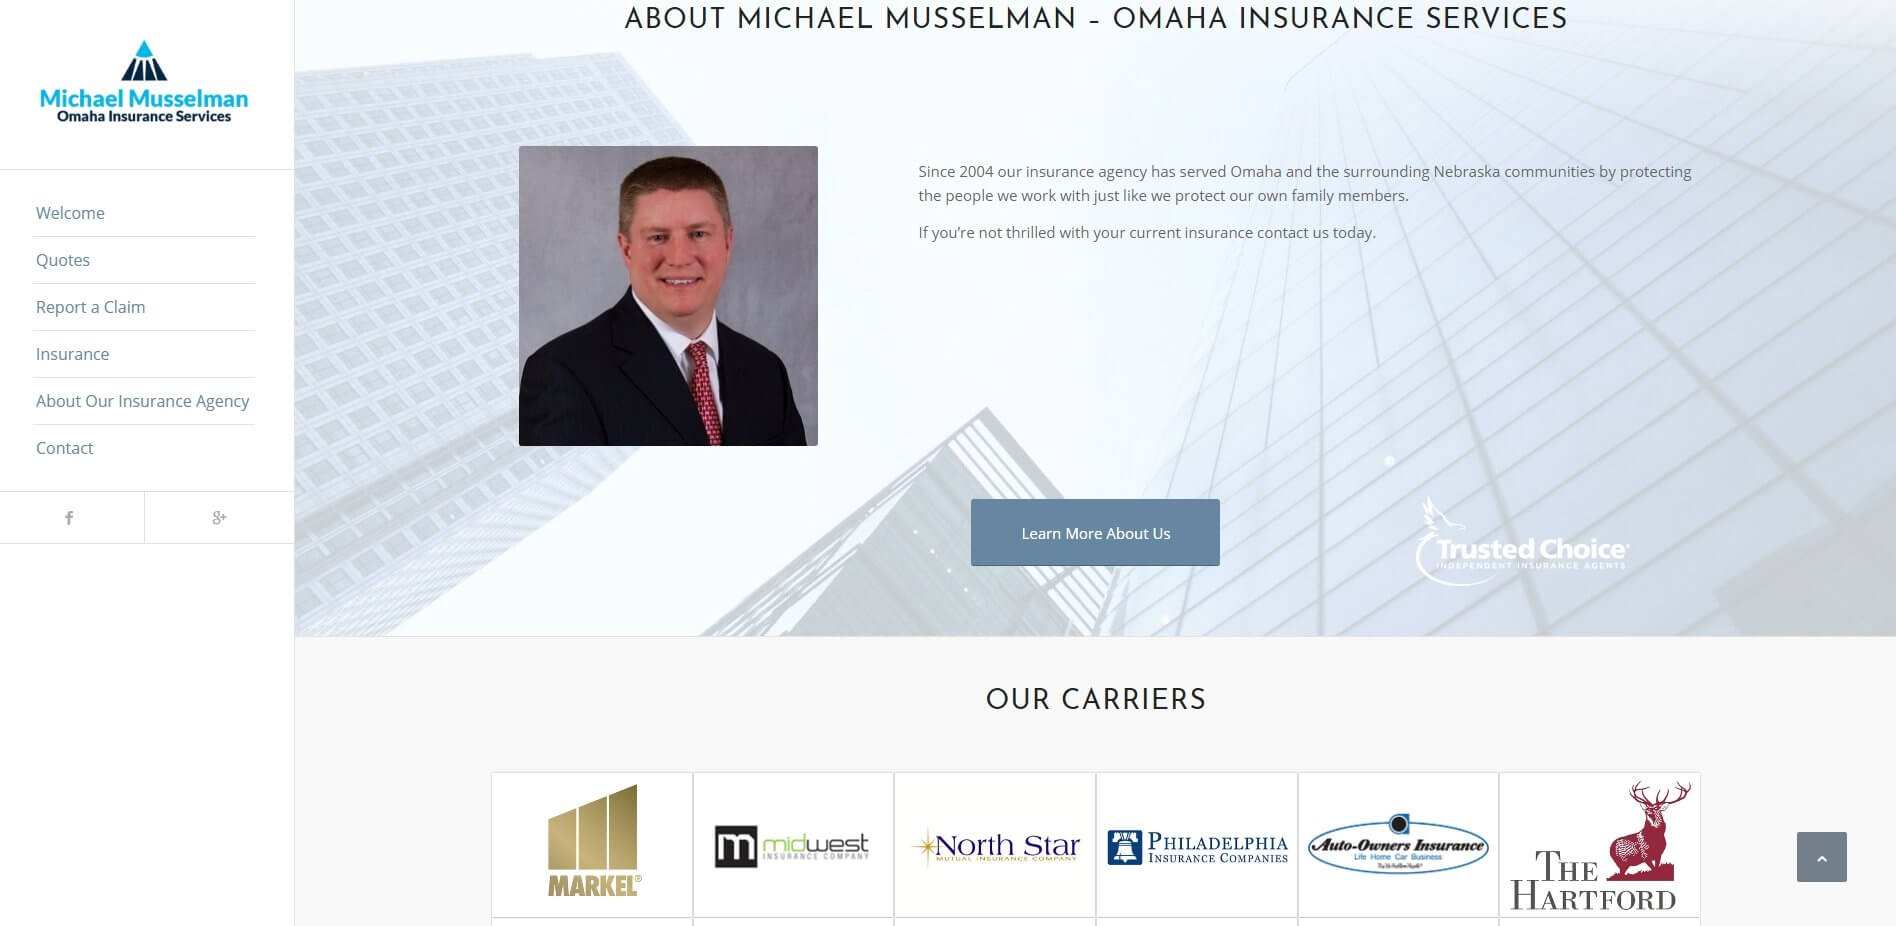 Valley List Welcomes - Omaha Insurance Services 1